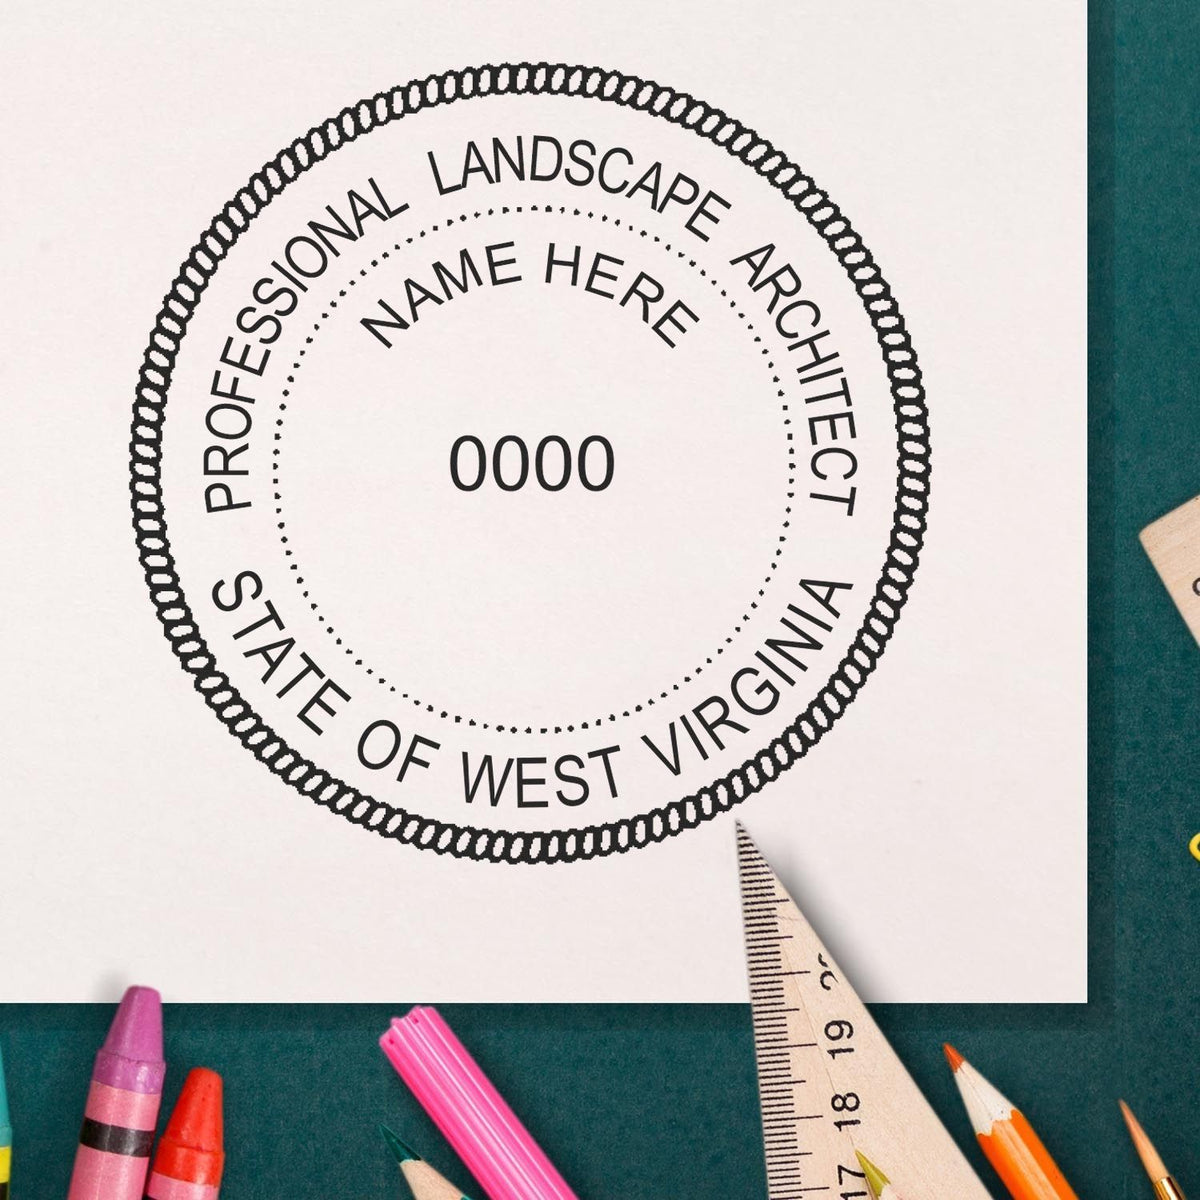 This paper is stamped with a sample imprint of the Premium MaxLight Pre-Inked West Virginia Landscape Architectural Stamp, signifying its quality and reliability.